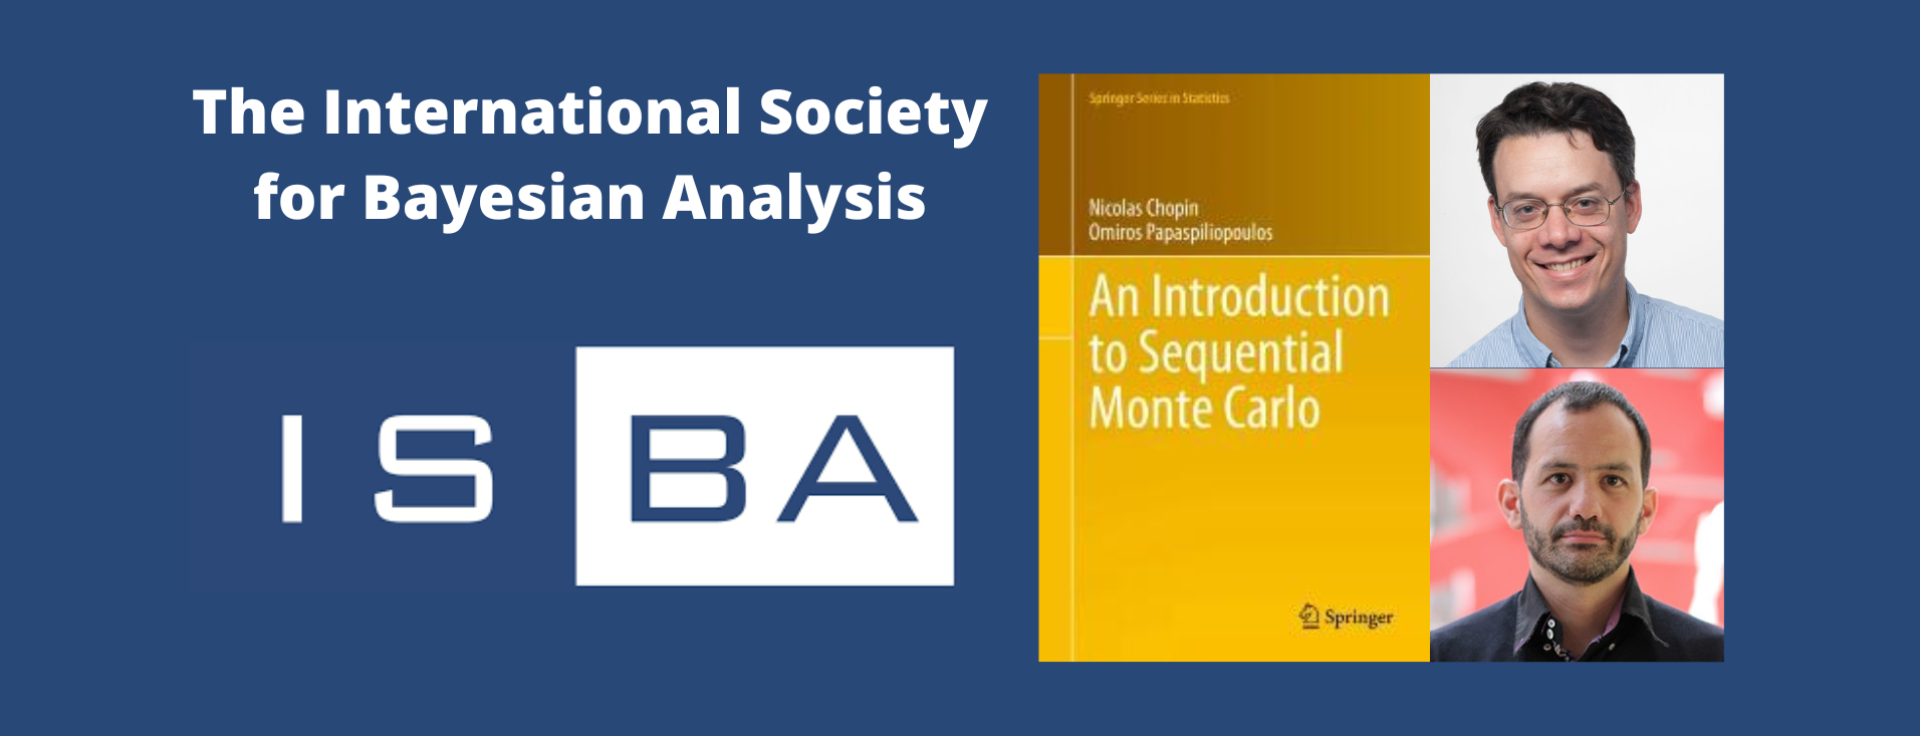 “An Introduction to Sequential Monte Carlo” reçoit le DeGroot Prize